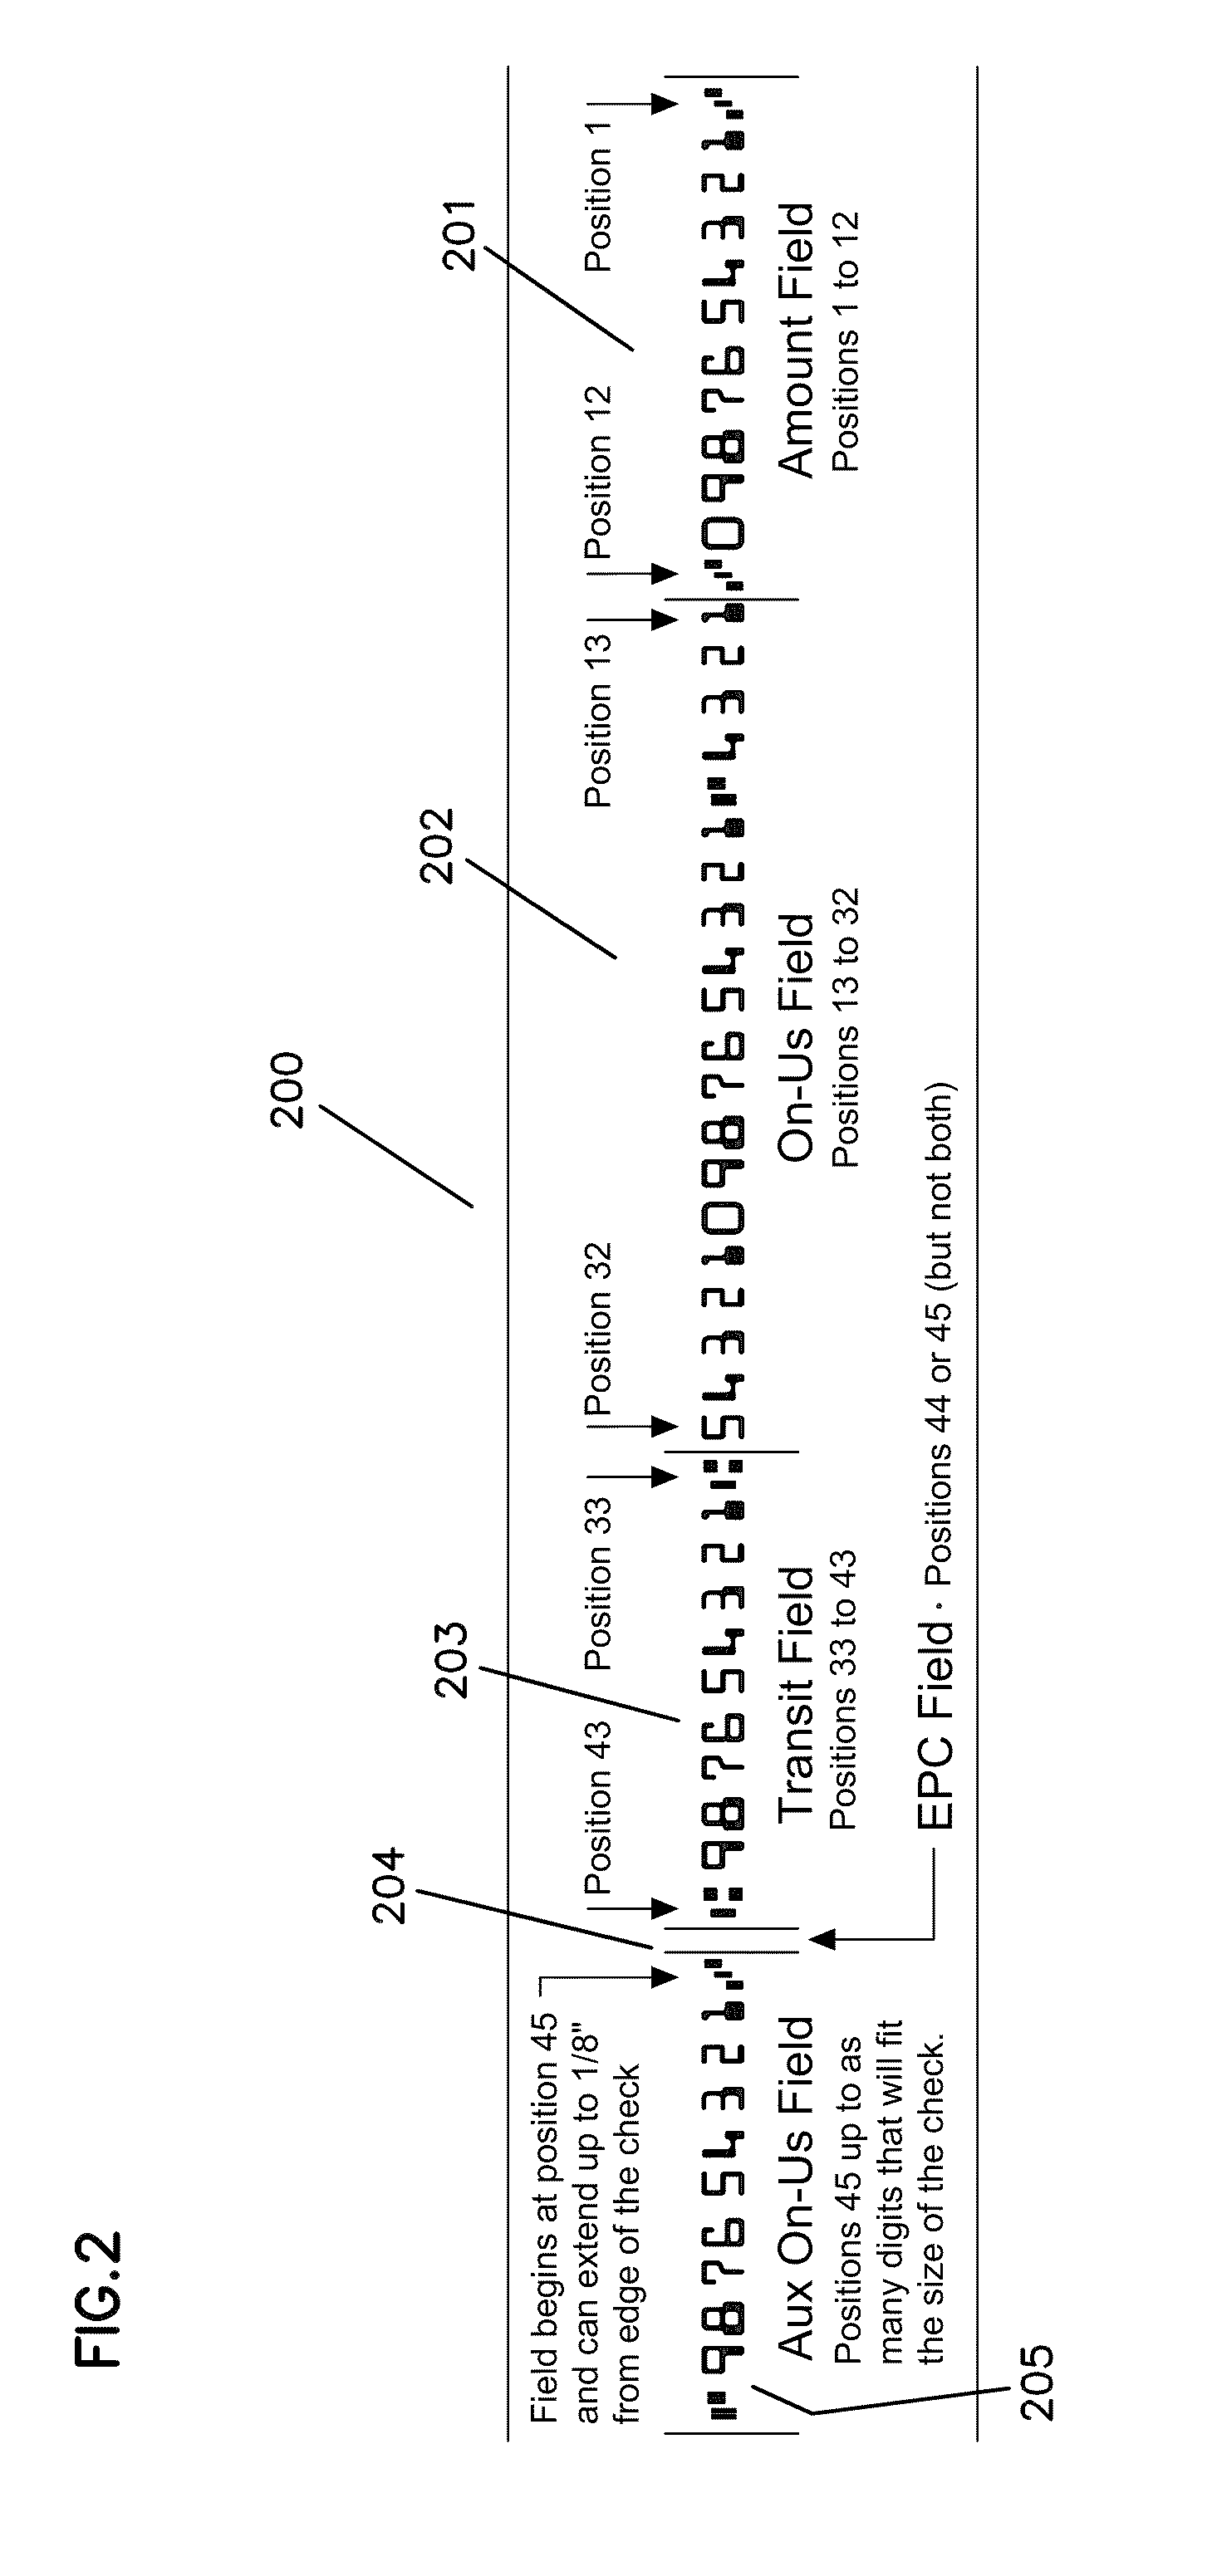 System and method for MICR-based duplicate detection and management